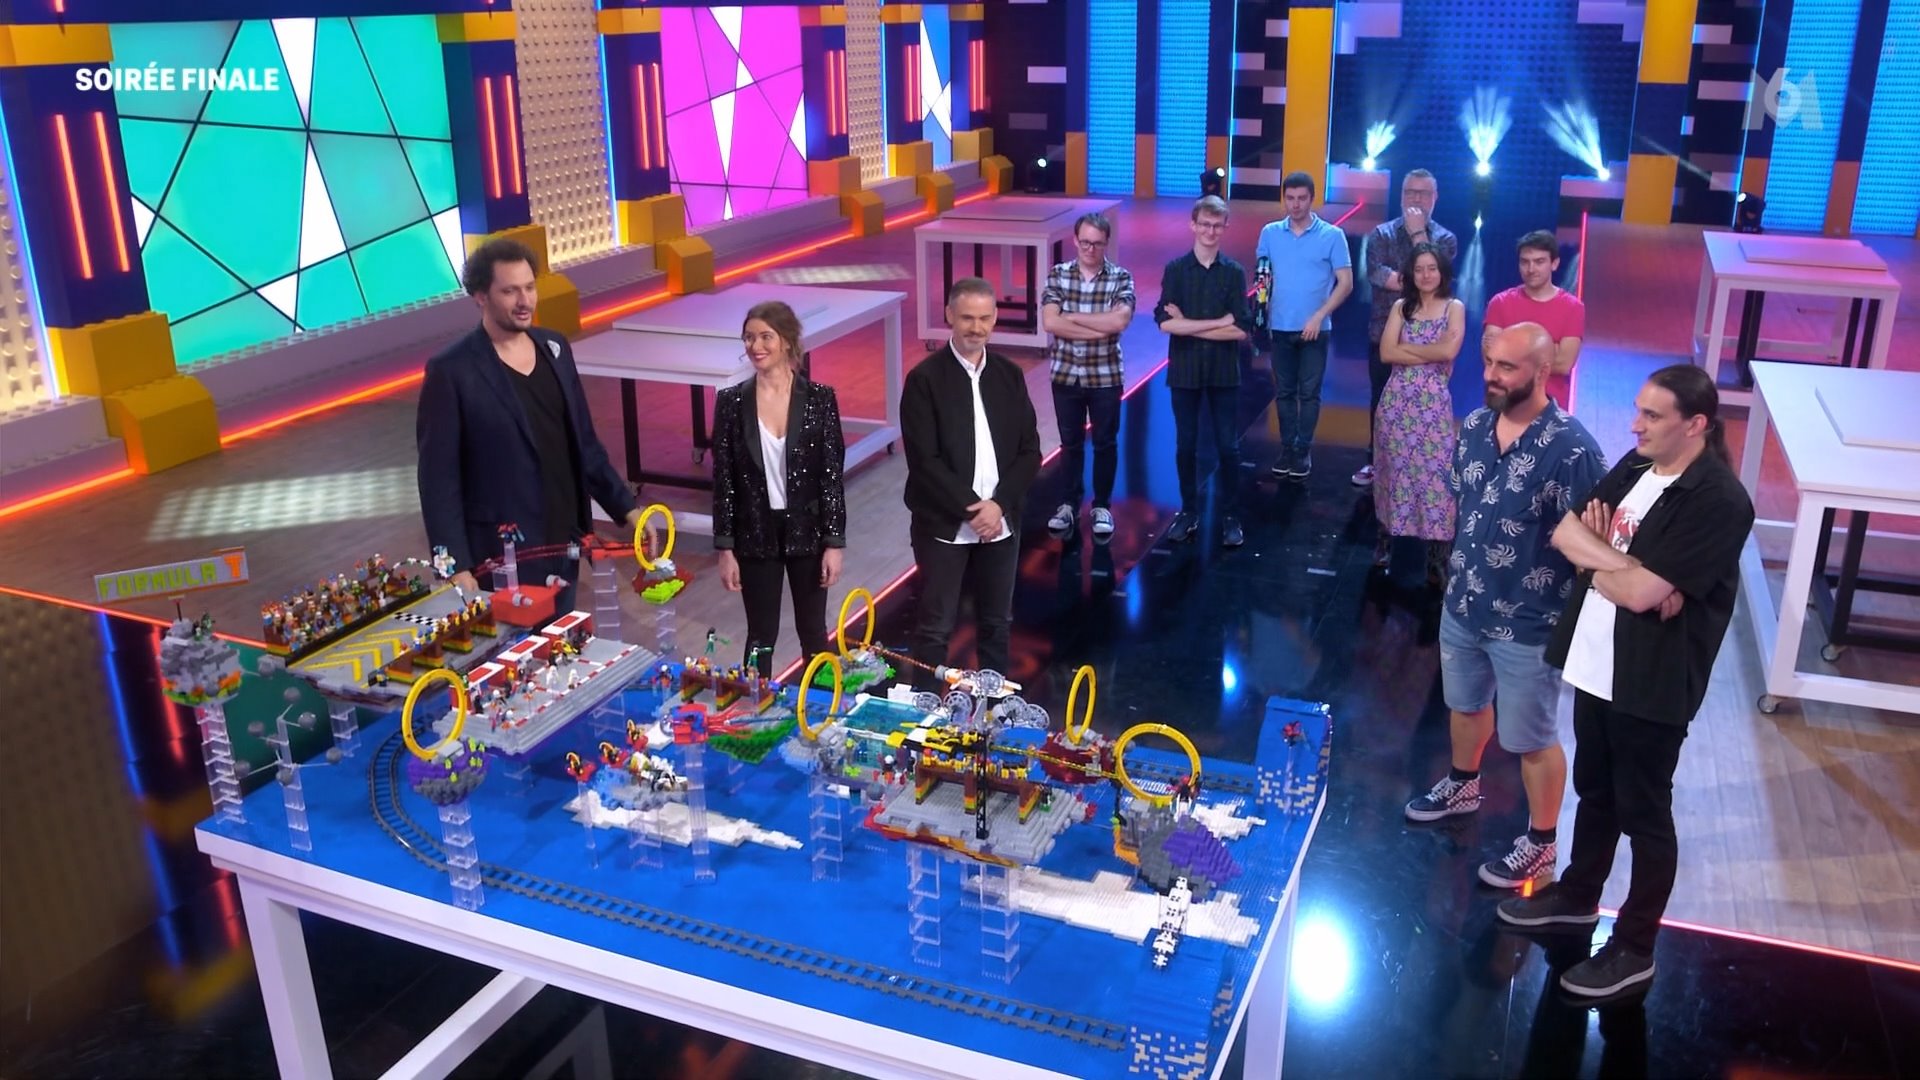 LEGO Masters France Season 1  -  Episode   Time Machine Challenge & The Grand Finale Hosted by Magician Eric Antoine and judged by Artist Paulina Aubey & LEGO Certified Professional Georg Schmitt. The series leads the way for new challenges you're likely to see around the world. Our teams are Maximilien & Thibault, Christelle & Johan, Marguerite & Renaud, Yann & Jean-Philippe, Loïc & Guillaume, Alban & Xavier, Sébastien & David and Ariana & Aurélien.